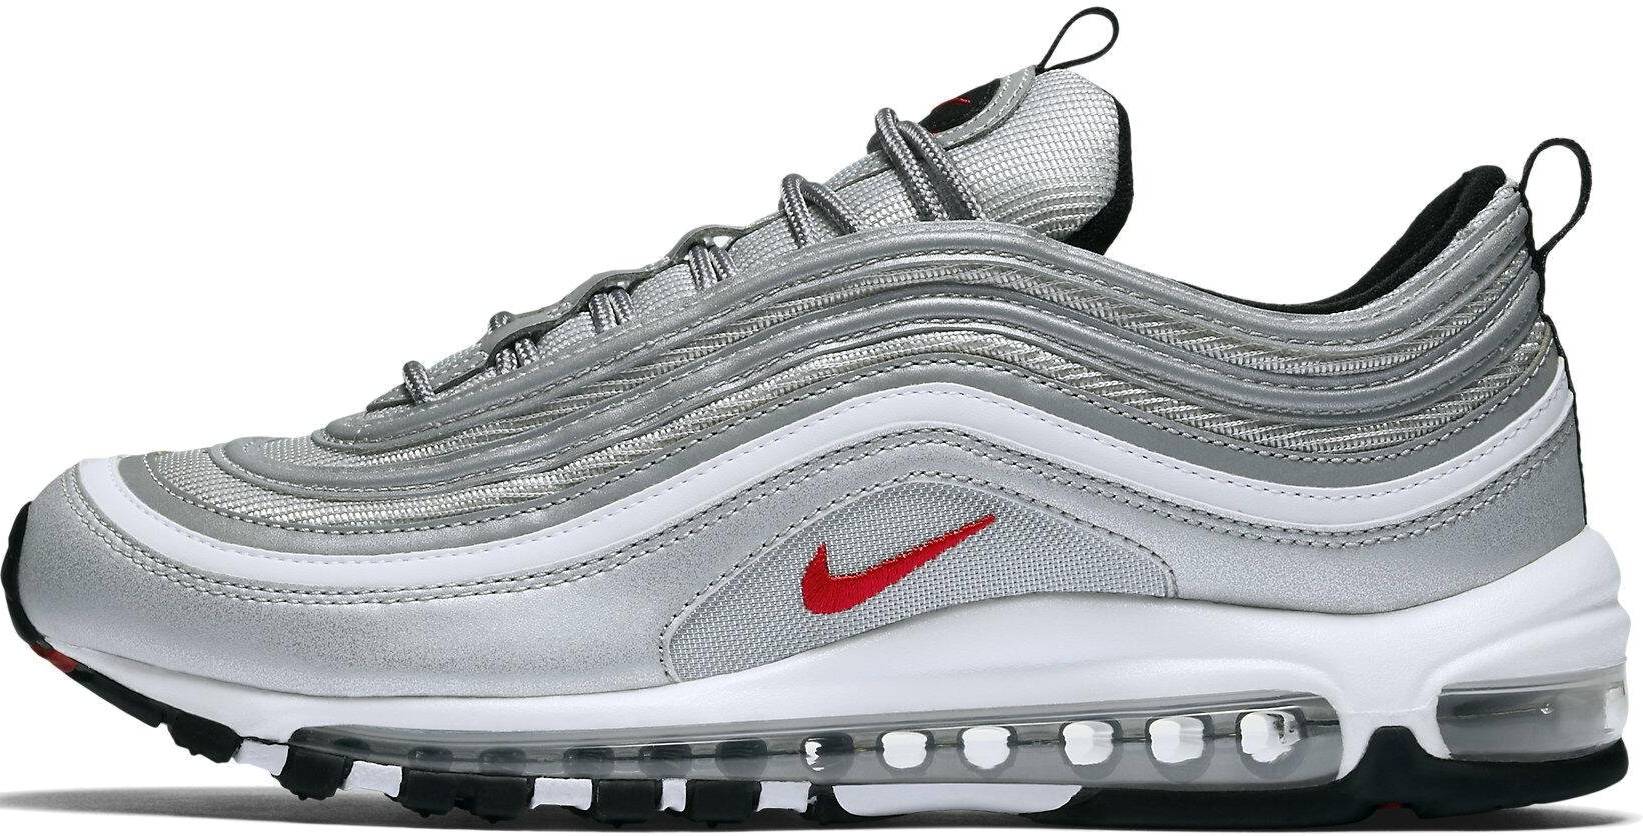 Save 15% on Nike Air Max 97 Sneakers 